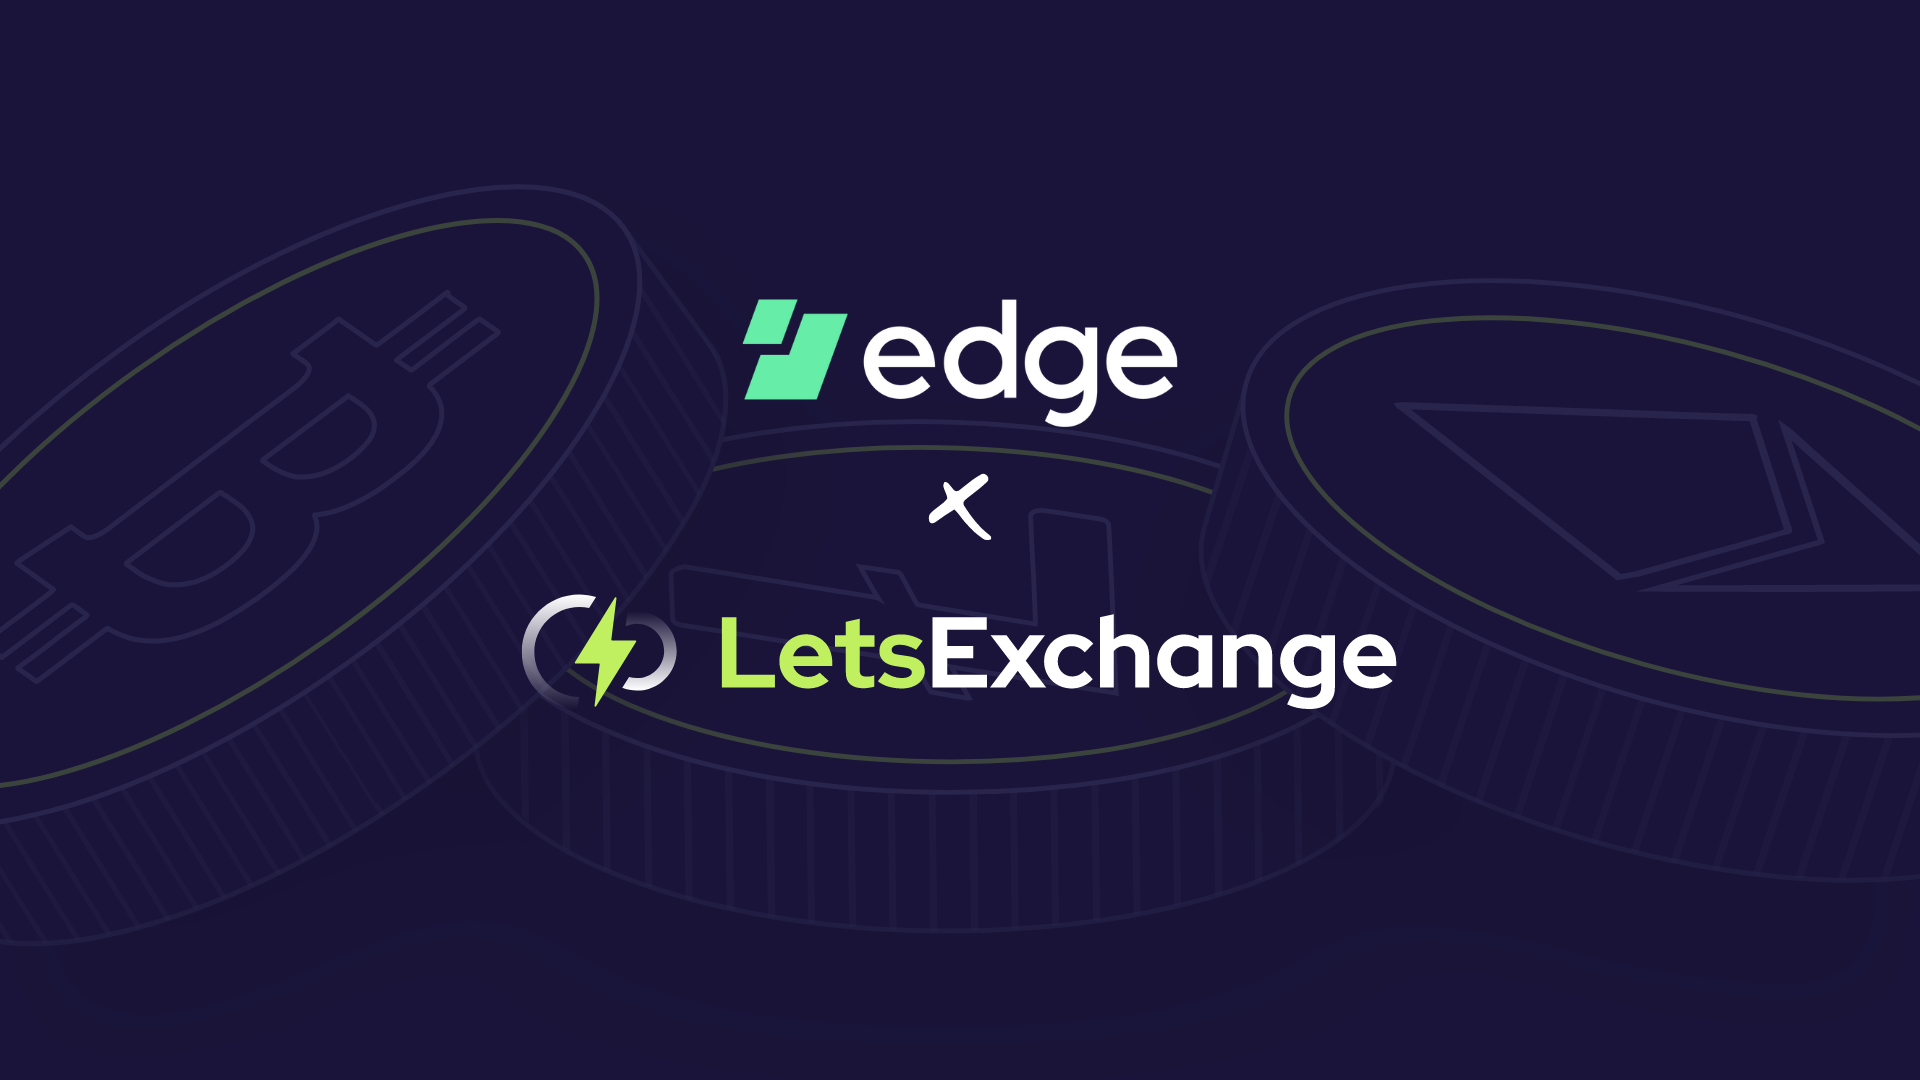 Edge adds support for LetsExchange